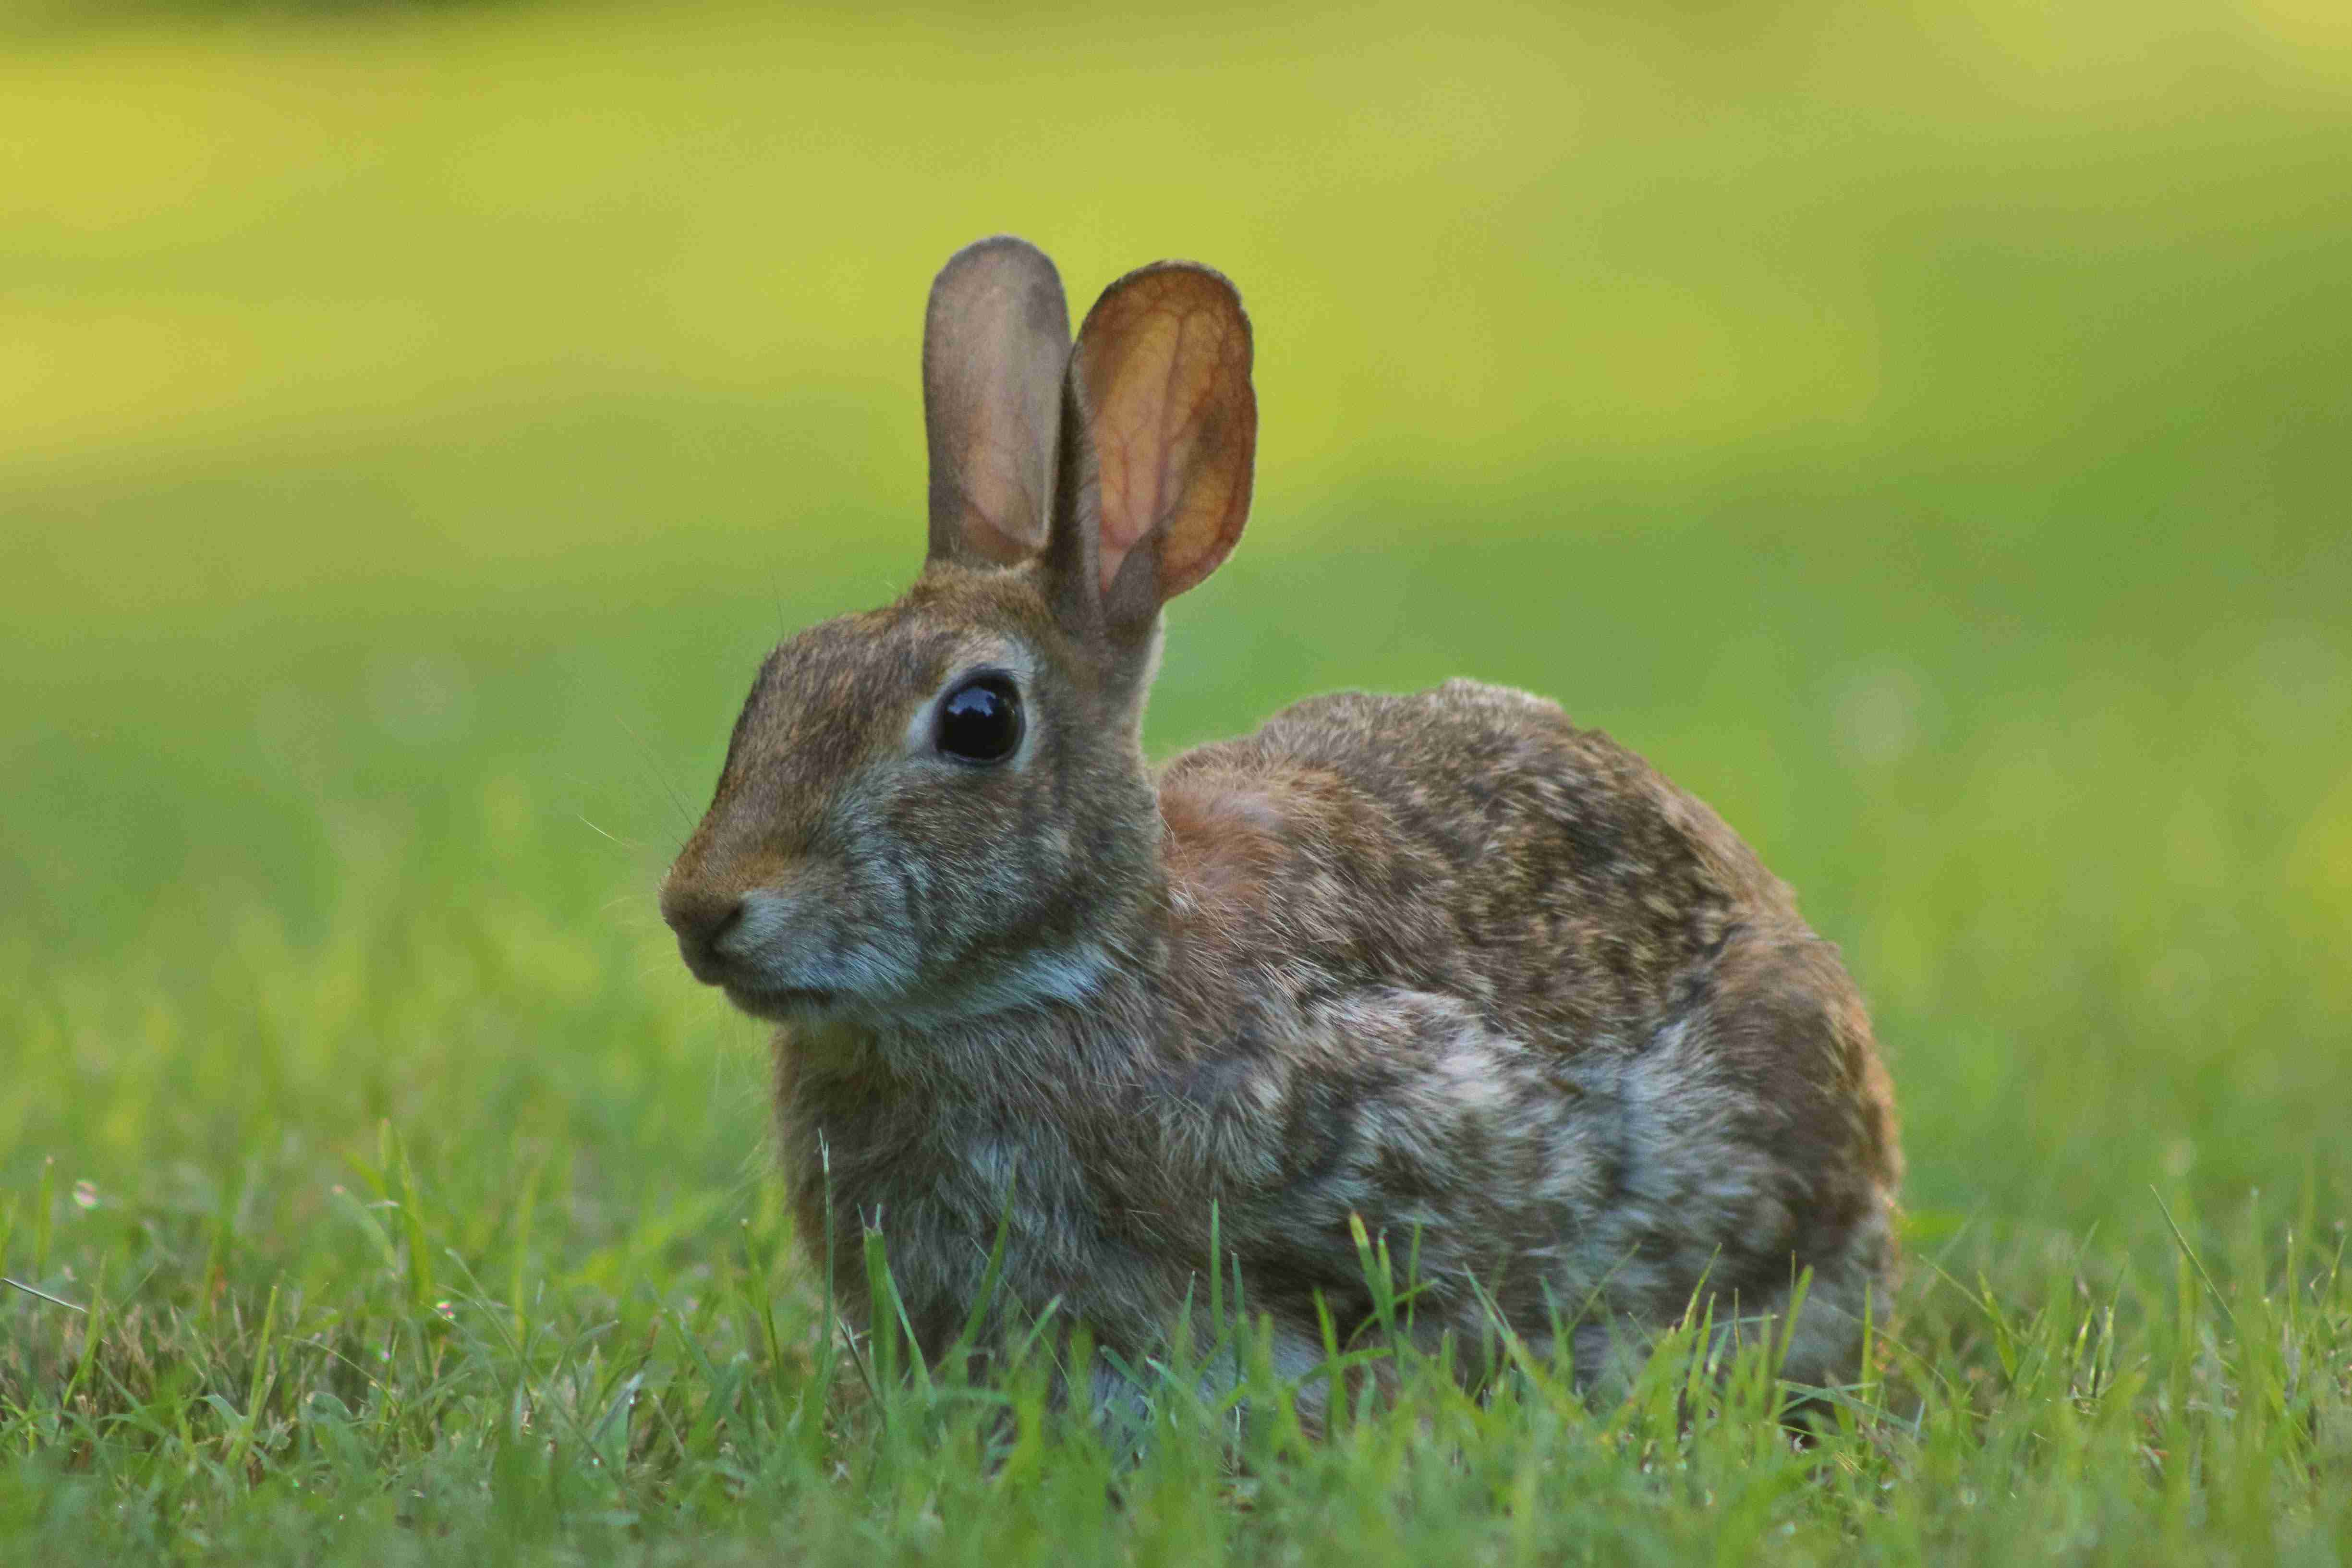 5 Key Indicators of Rabbit Pain: How to Recognize and Respond